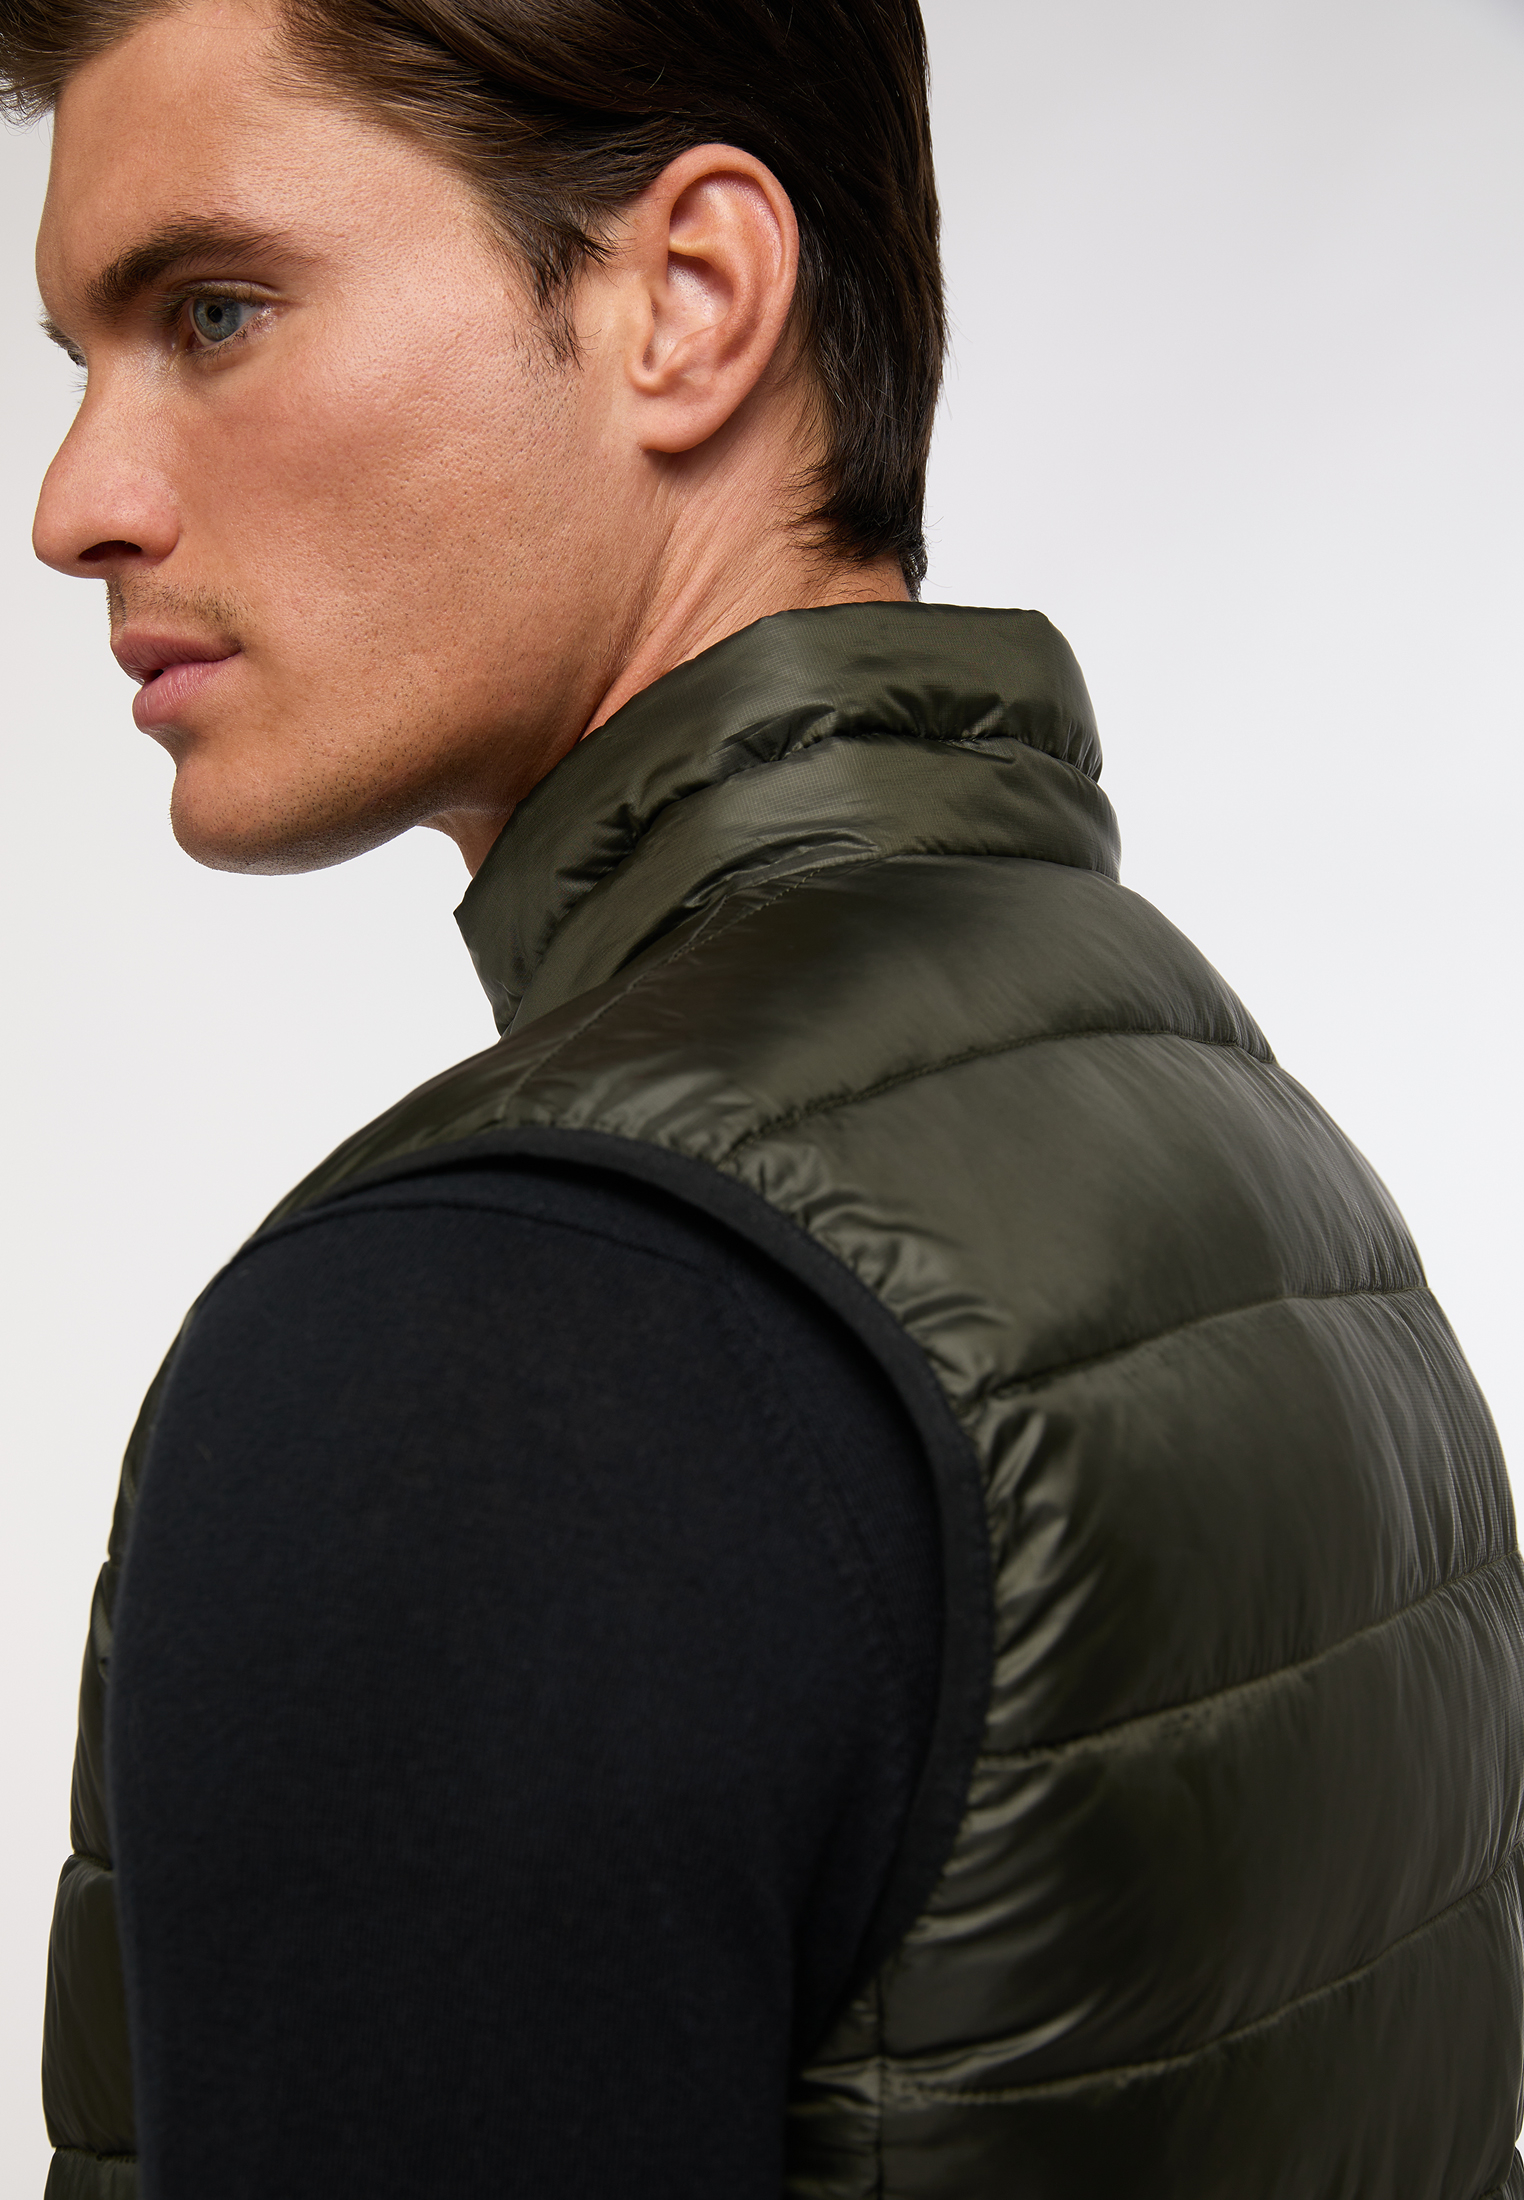 Quilted gilet in olive plain